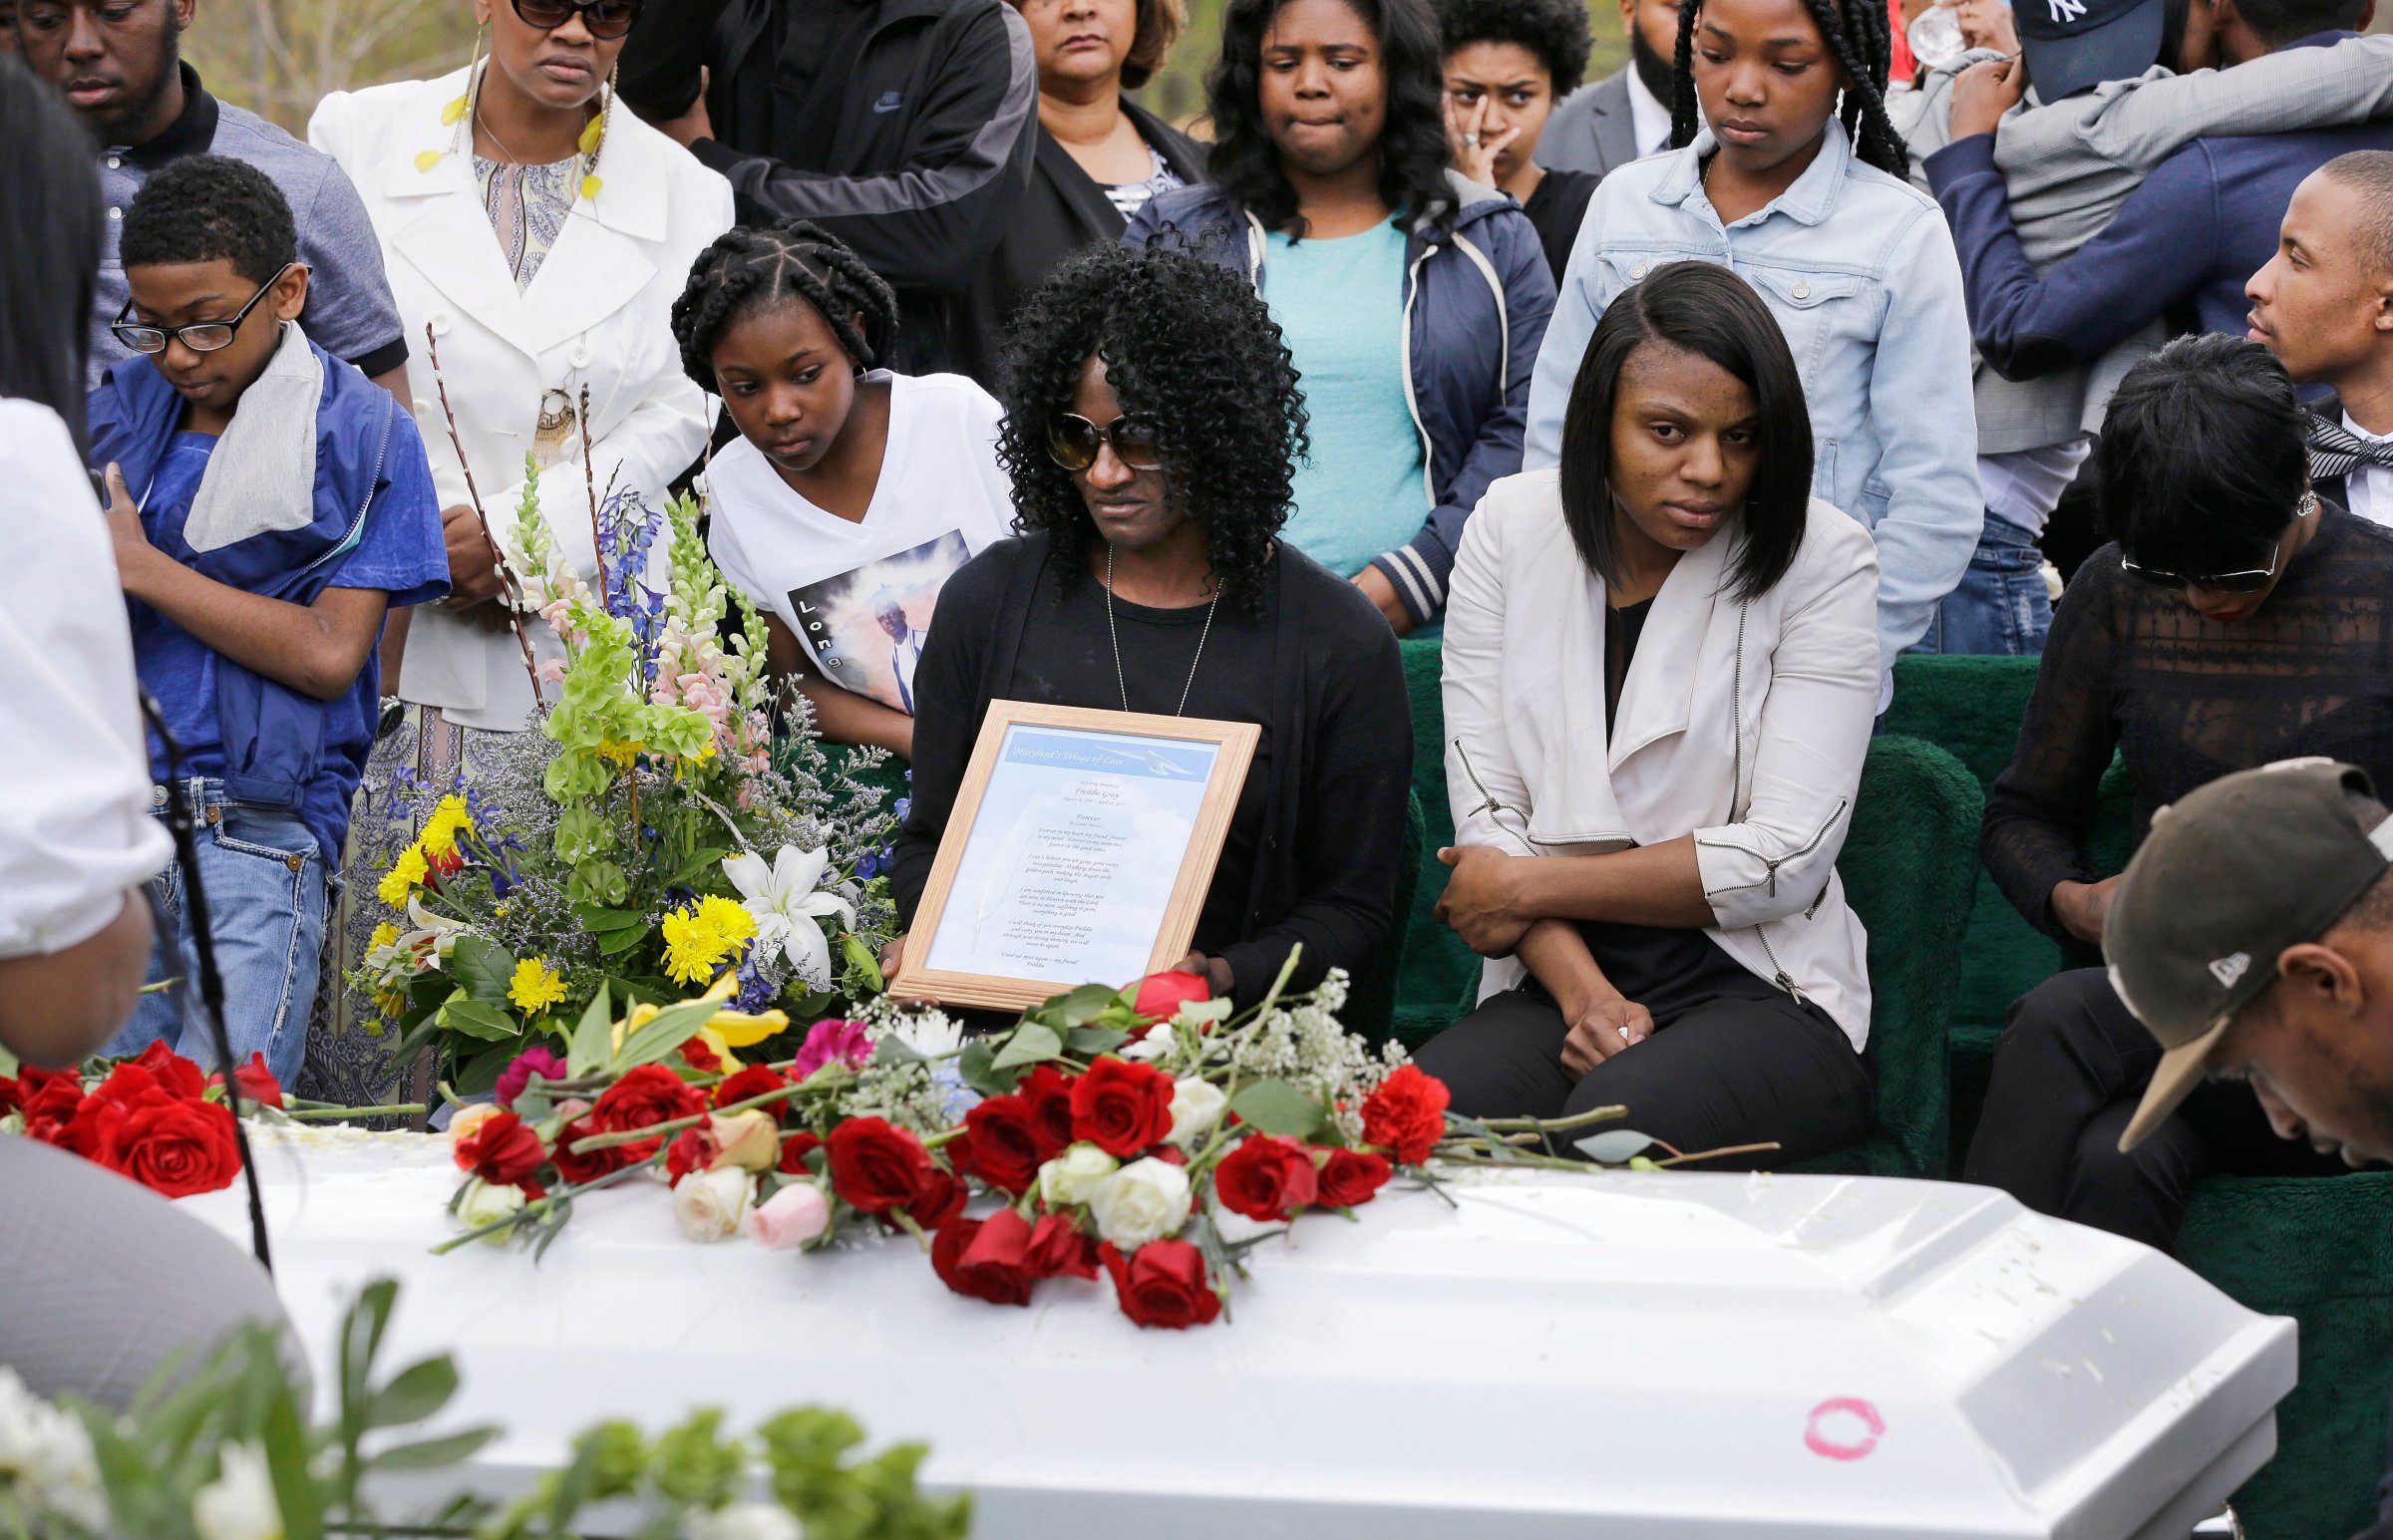 Gloria Darden (C), mother of Freddie Gray, at Gray's burial in Baltimore on April 27, 2015.